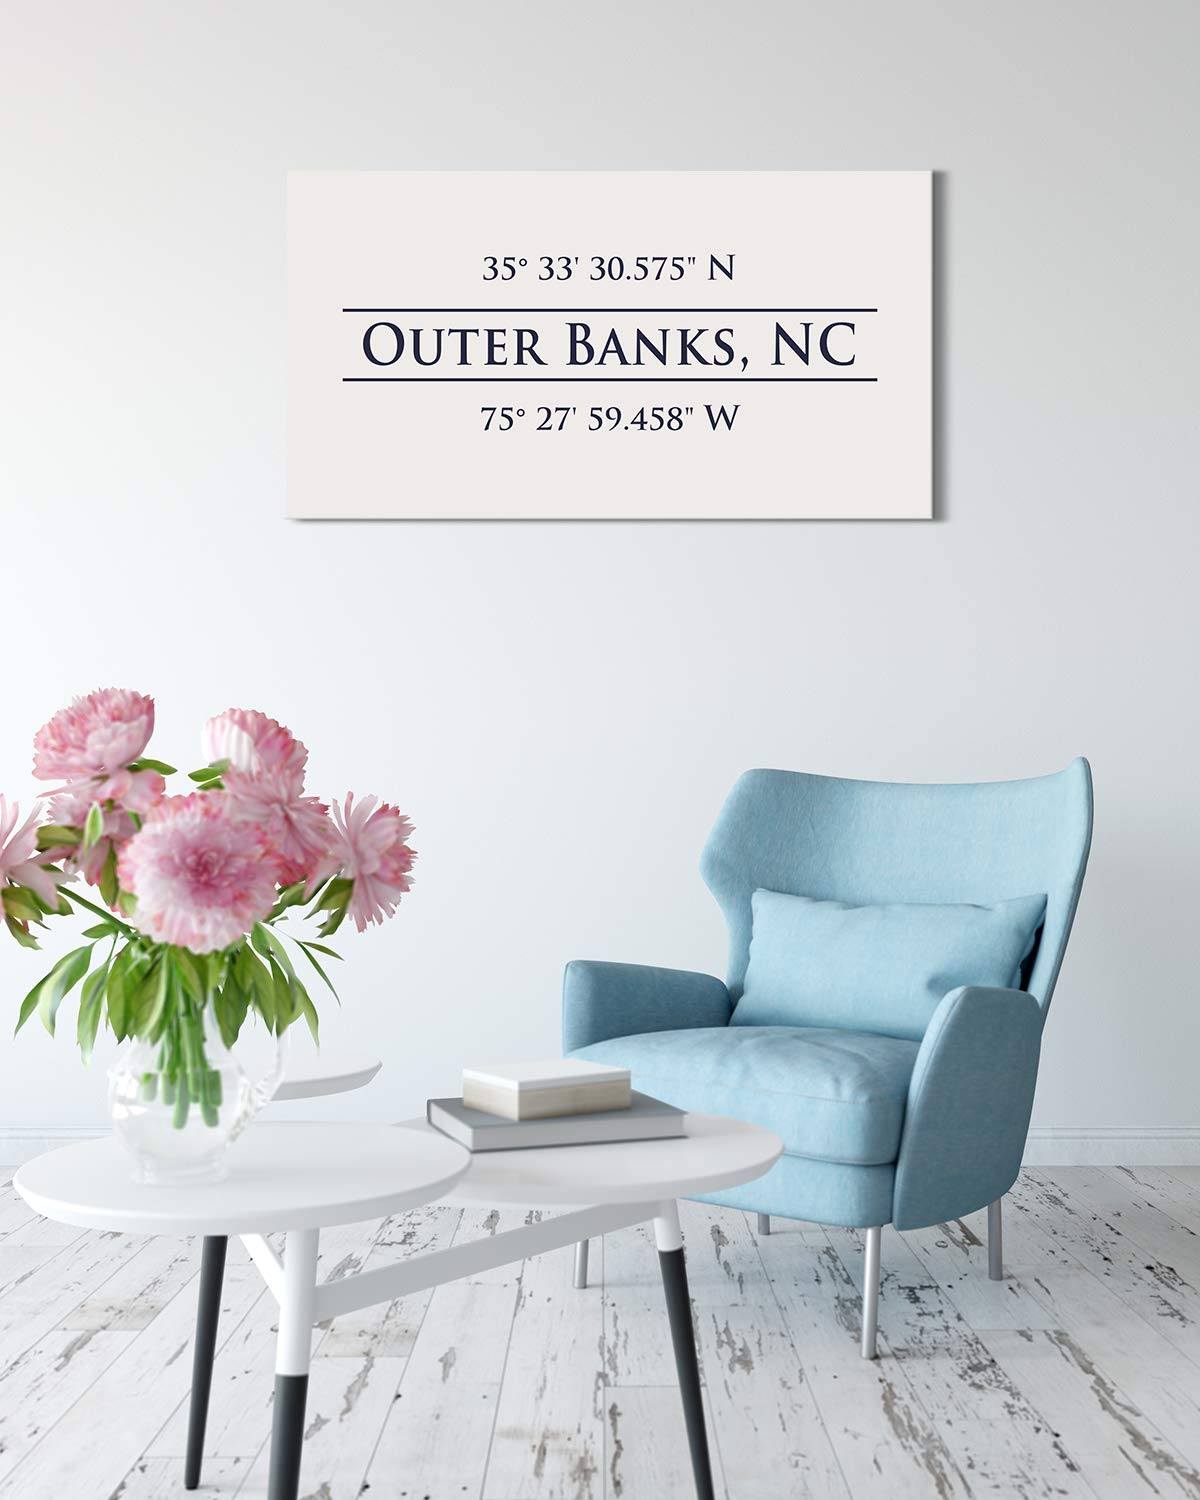 Outer Banks, NC 35° 33' 30.575" N, 75° 27' 59.458" W - Wall Decor Art Canvas with an offwhite background - Ready to Hang - Great for above a couch, table, bed or more